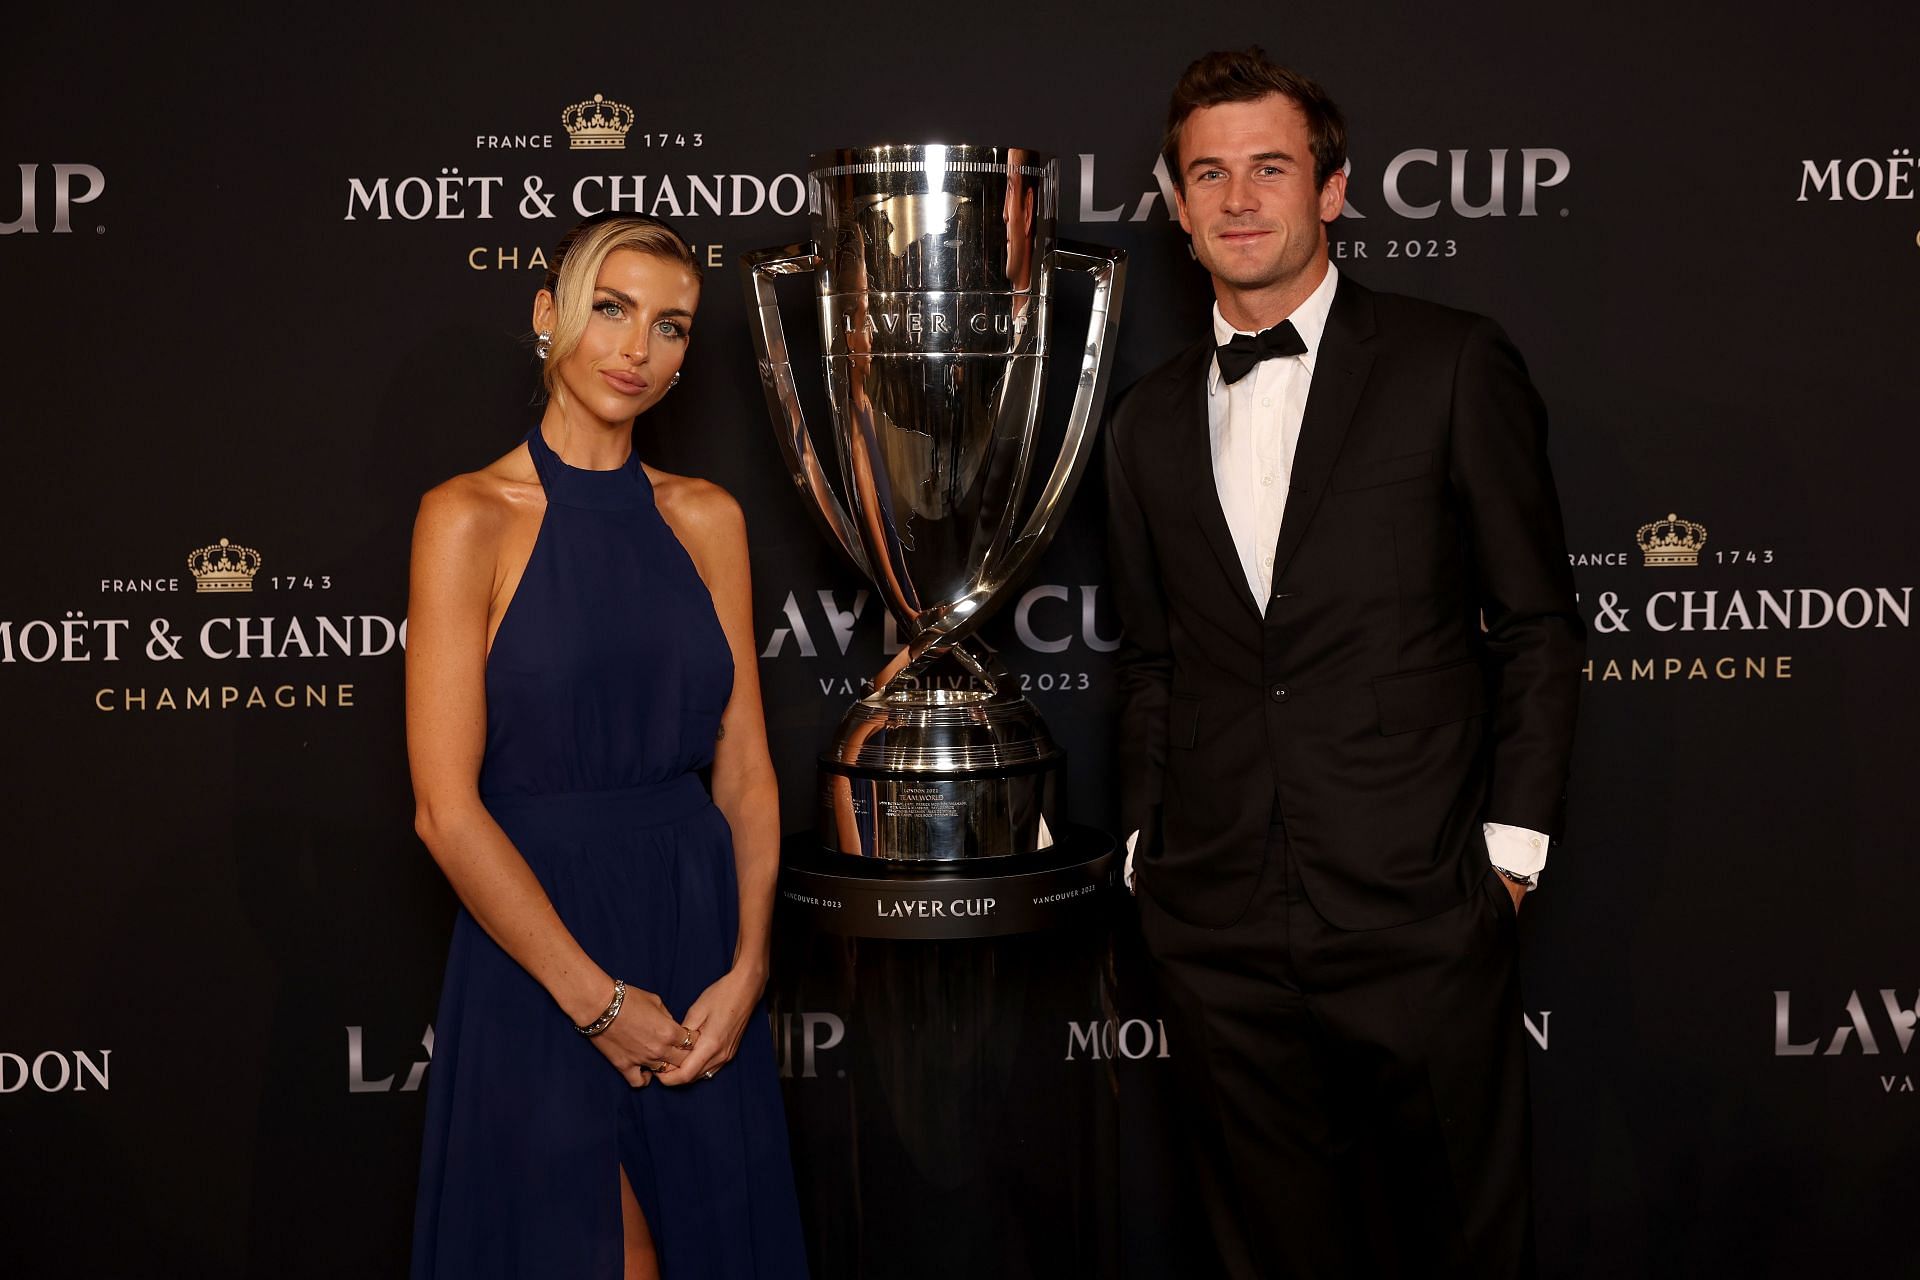 The couple pictured at the Laver Cup 2023